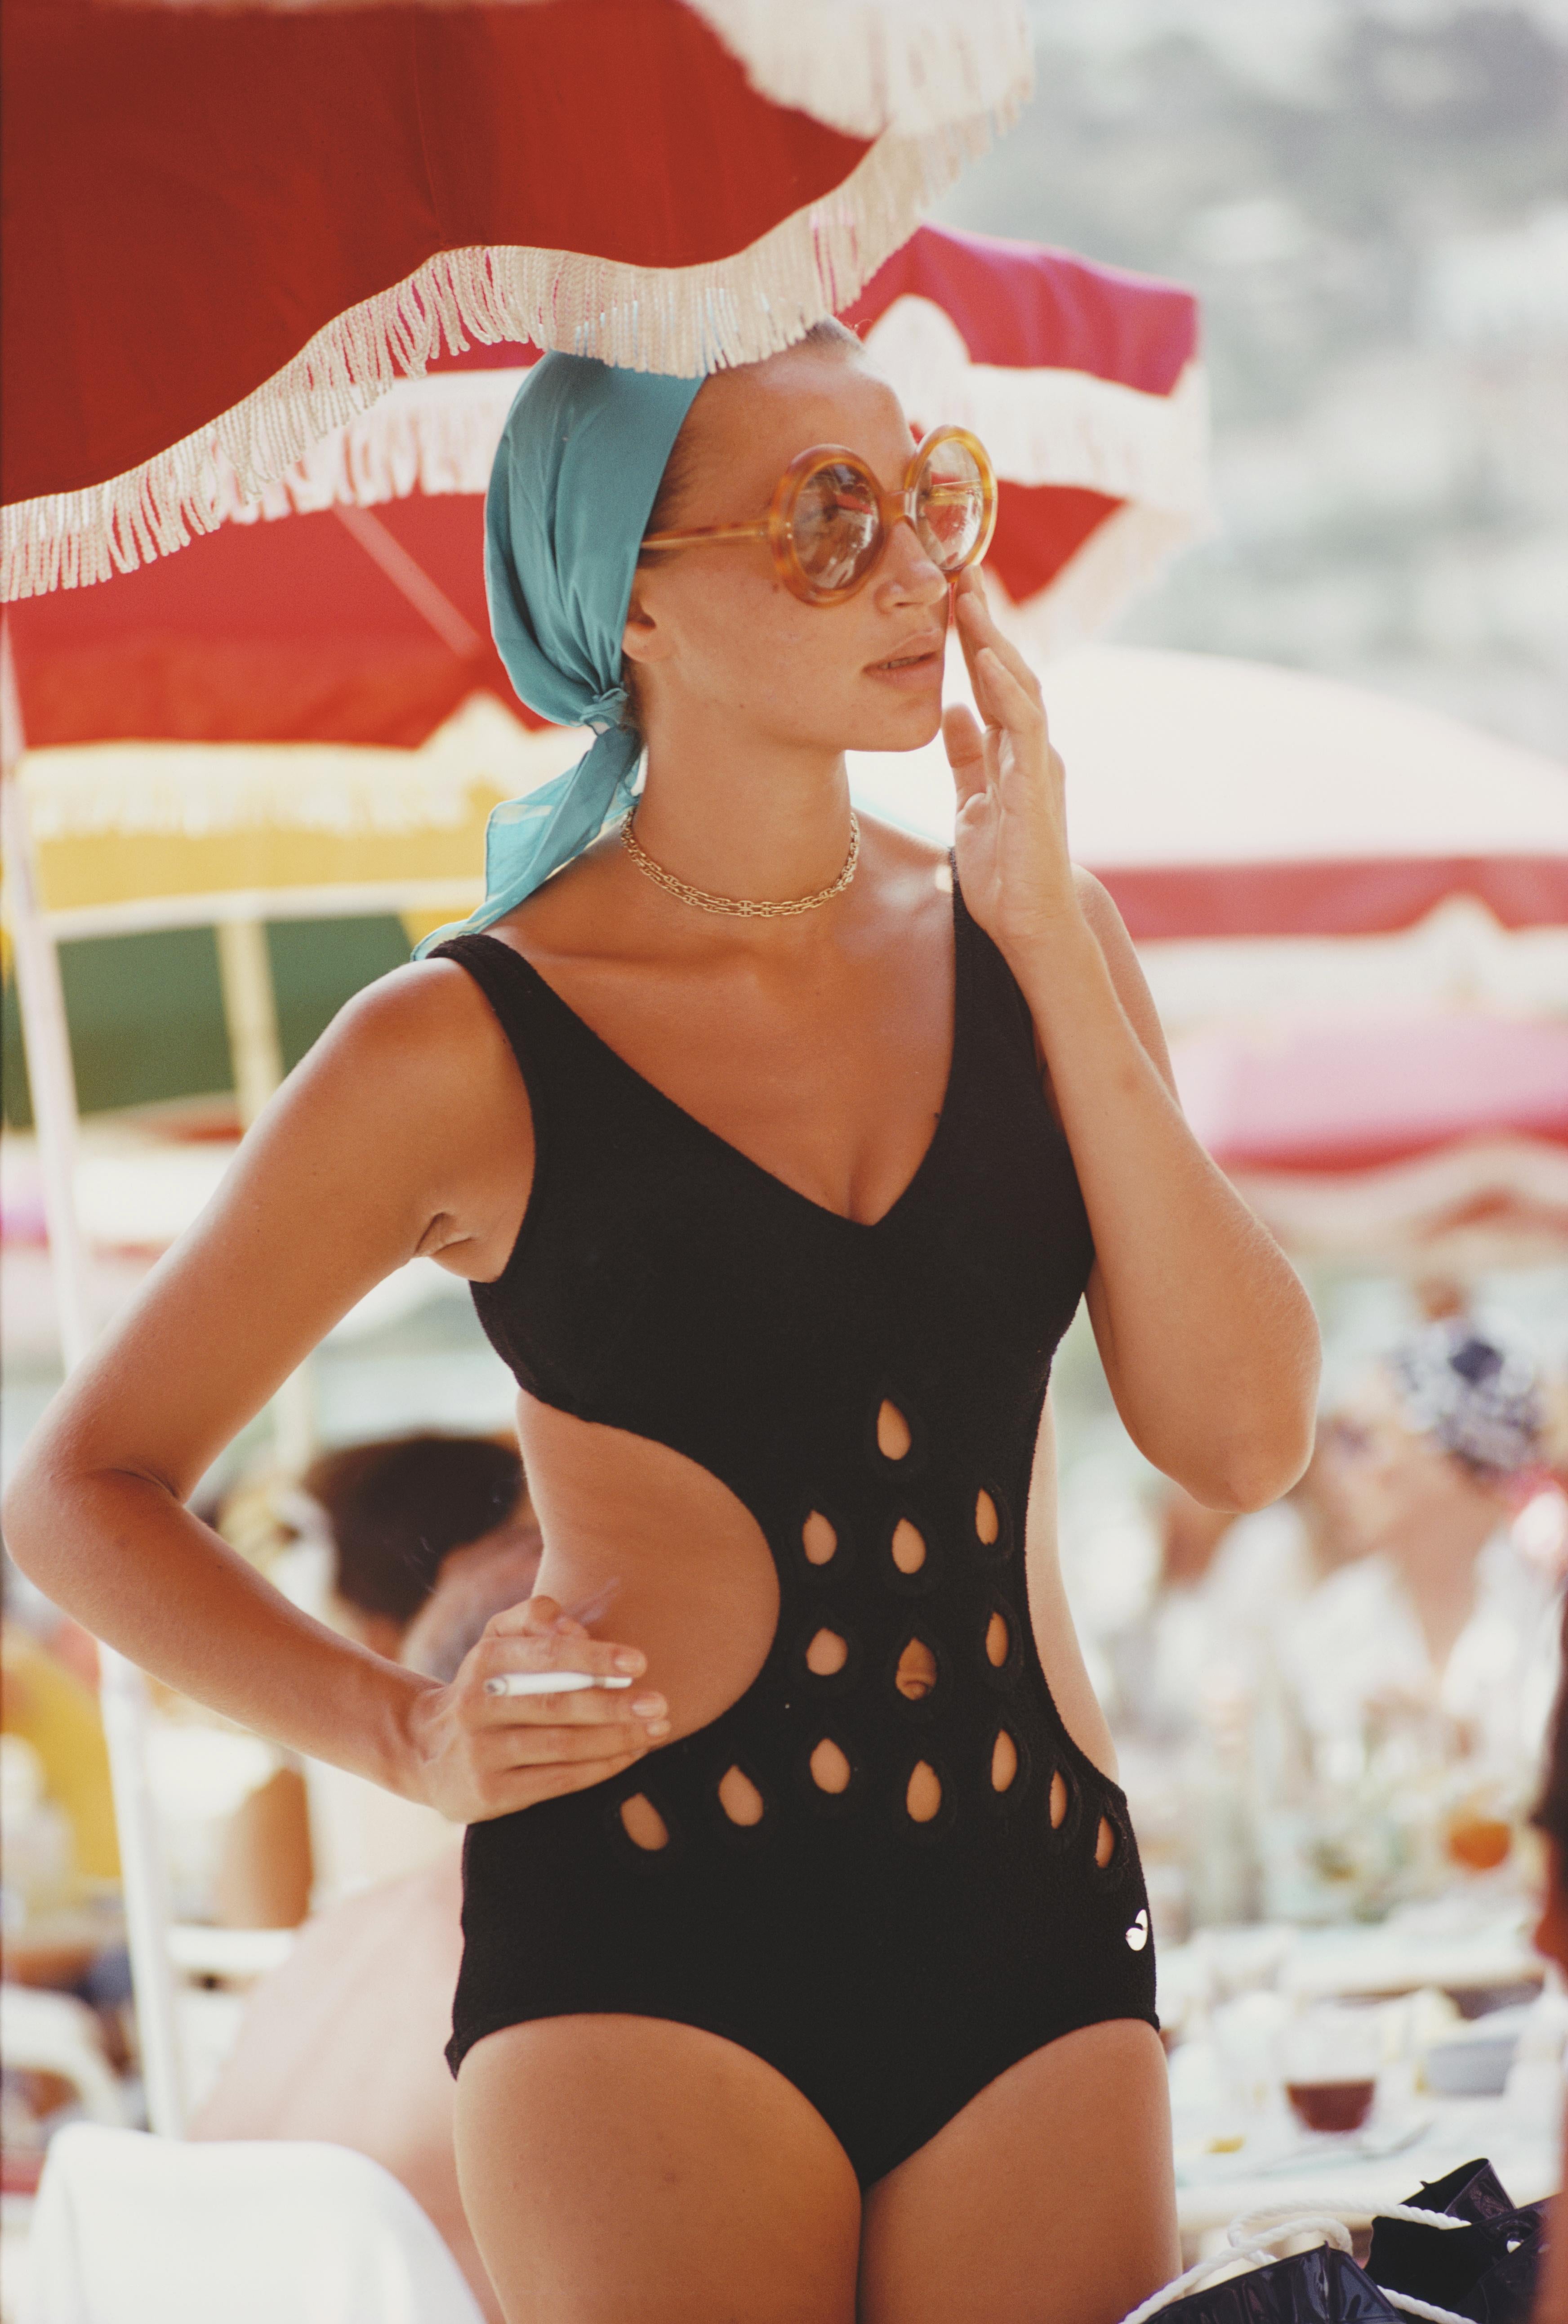 Slim Aarons Color Photograph - Monte Carlo Swimwear, Estate Edition: Classic midcentury French Riviera style